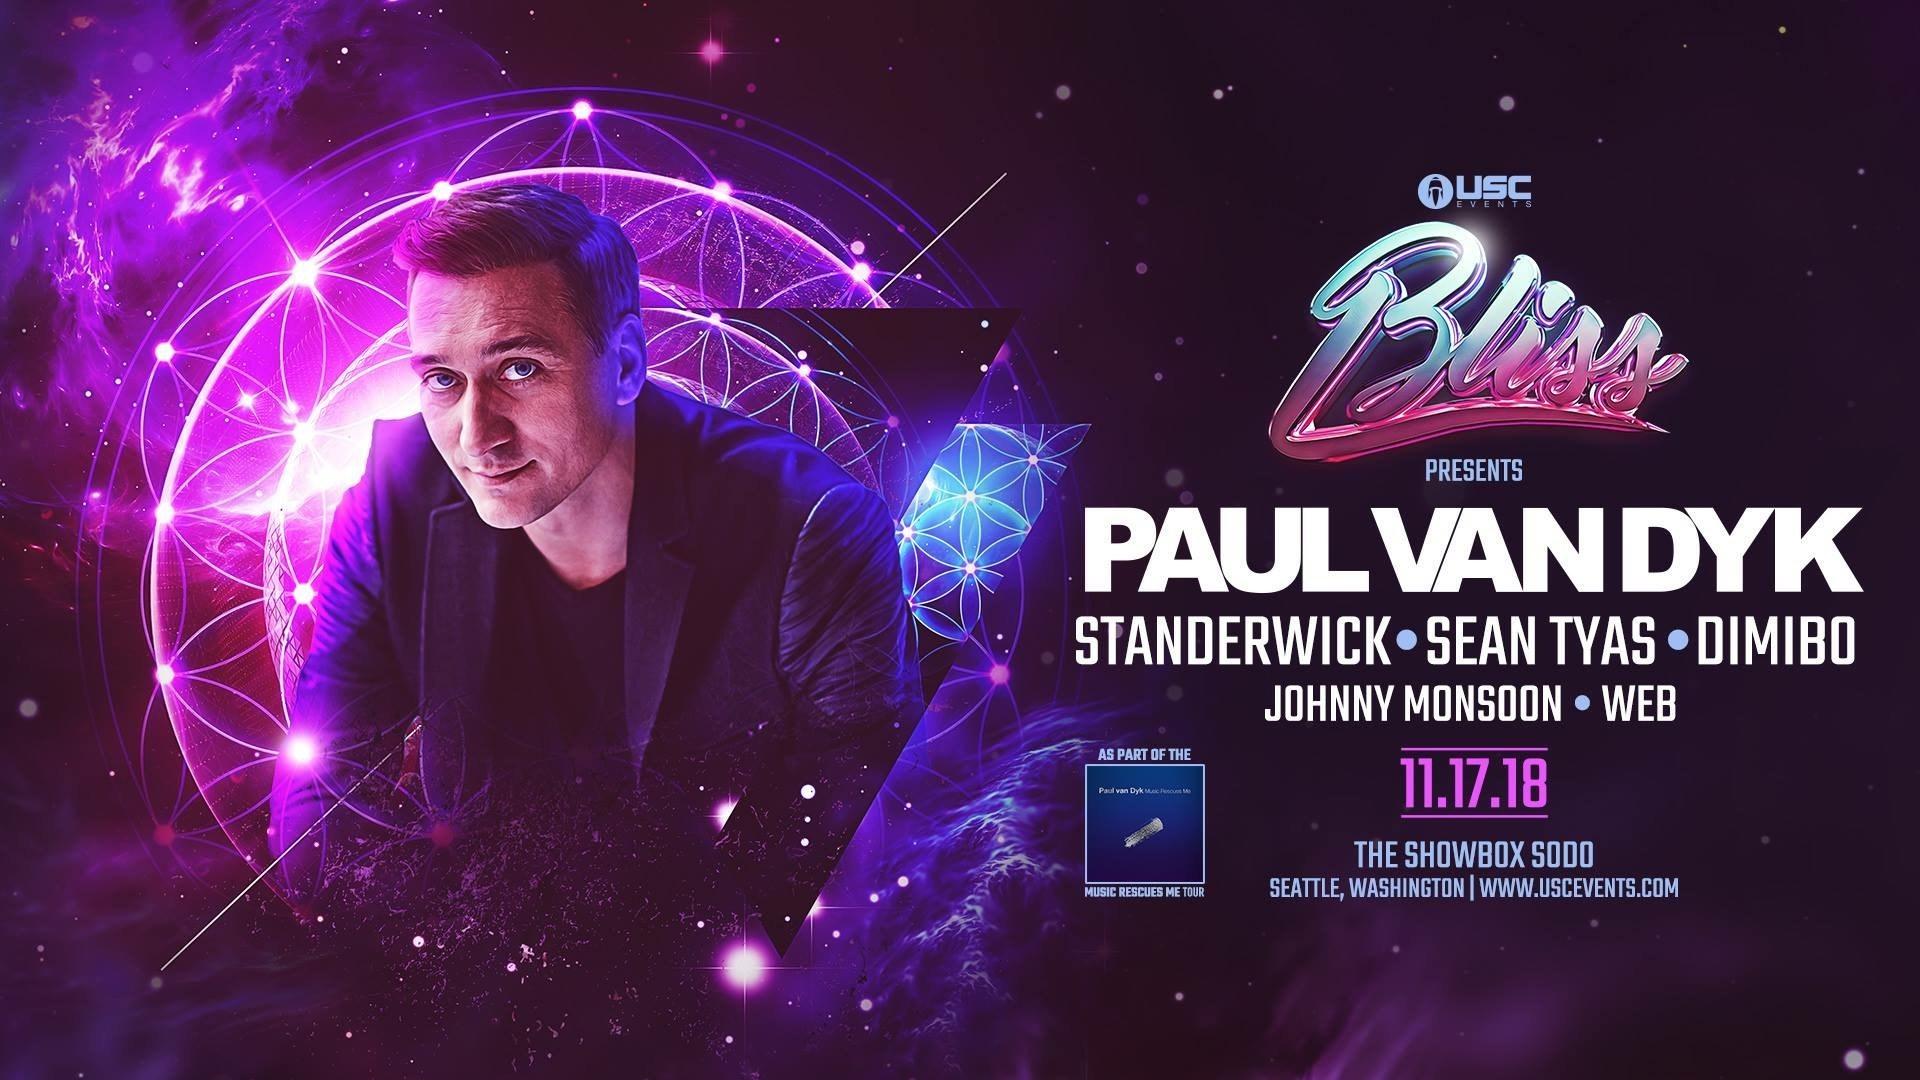 Paul van Dyk and USC Events Team Up To Bring Bliss Back To Seattle